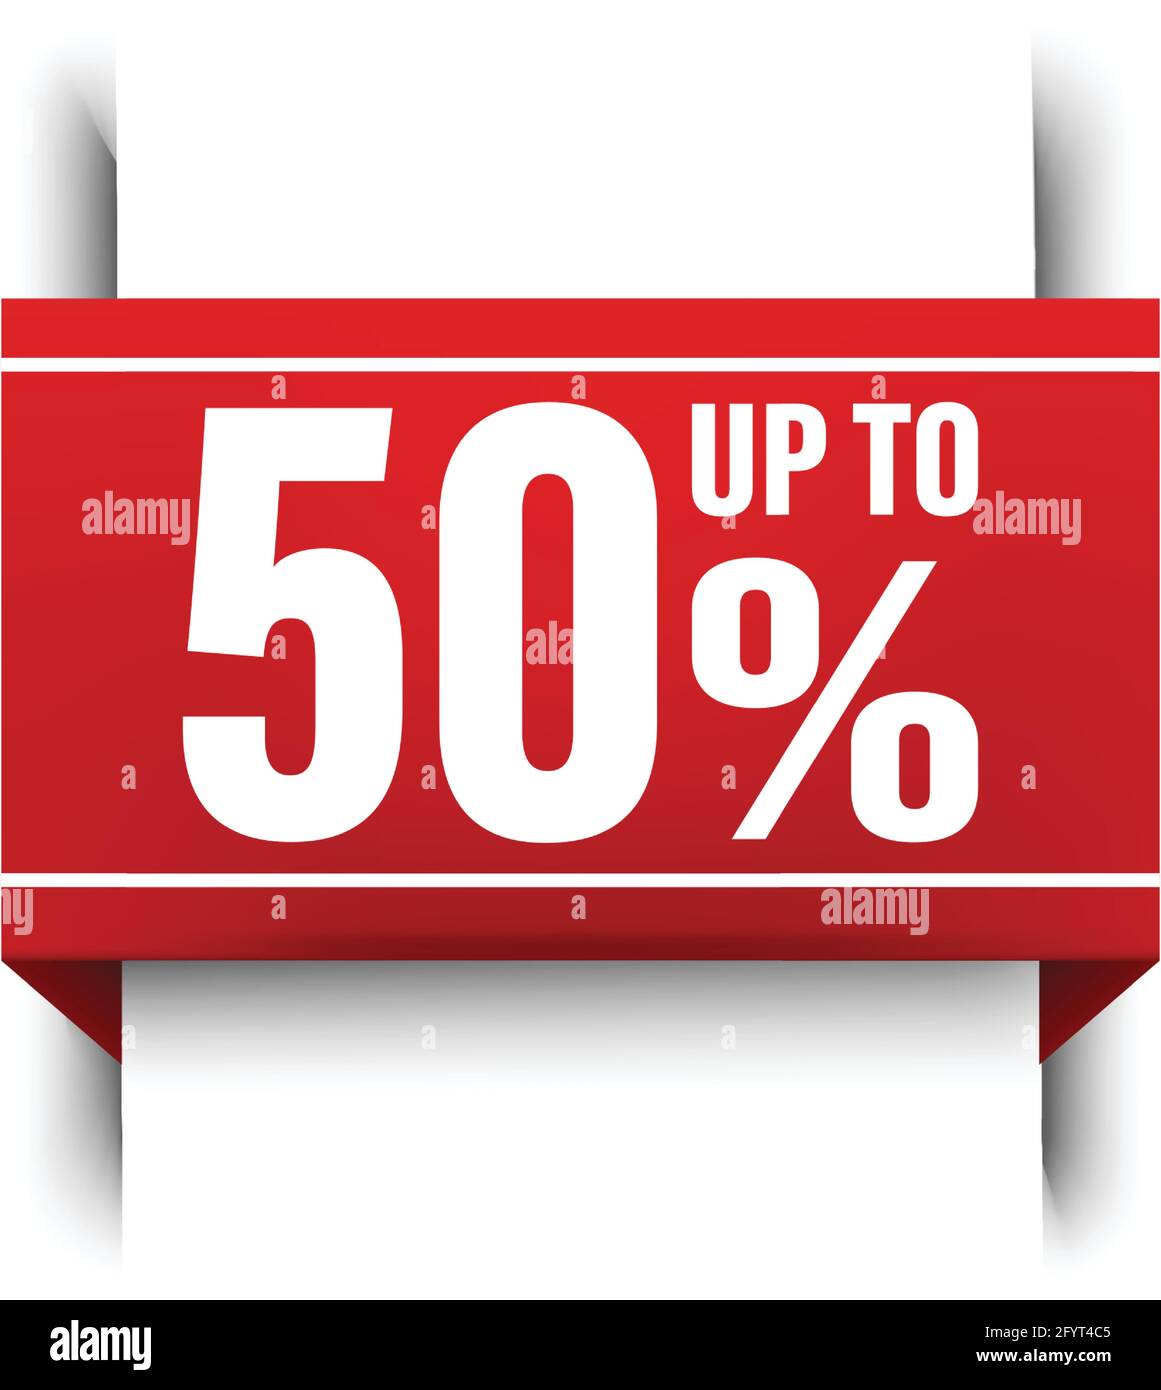 https://c8.alamy.com/comp/2FYT4C5/vector-icon-illustration-of-red-ribbon-banner-sale-bookmark-of-up-to-50-percent-off-2FYT4C5.jpg